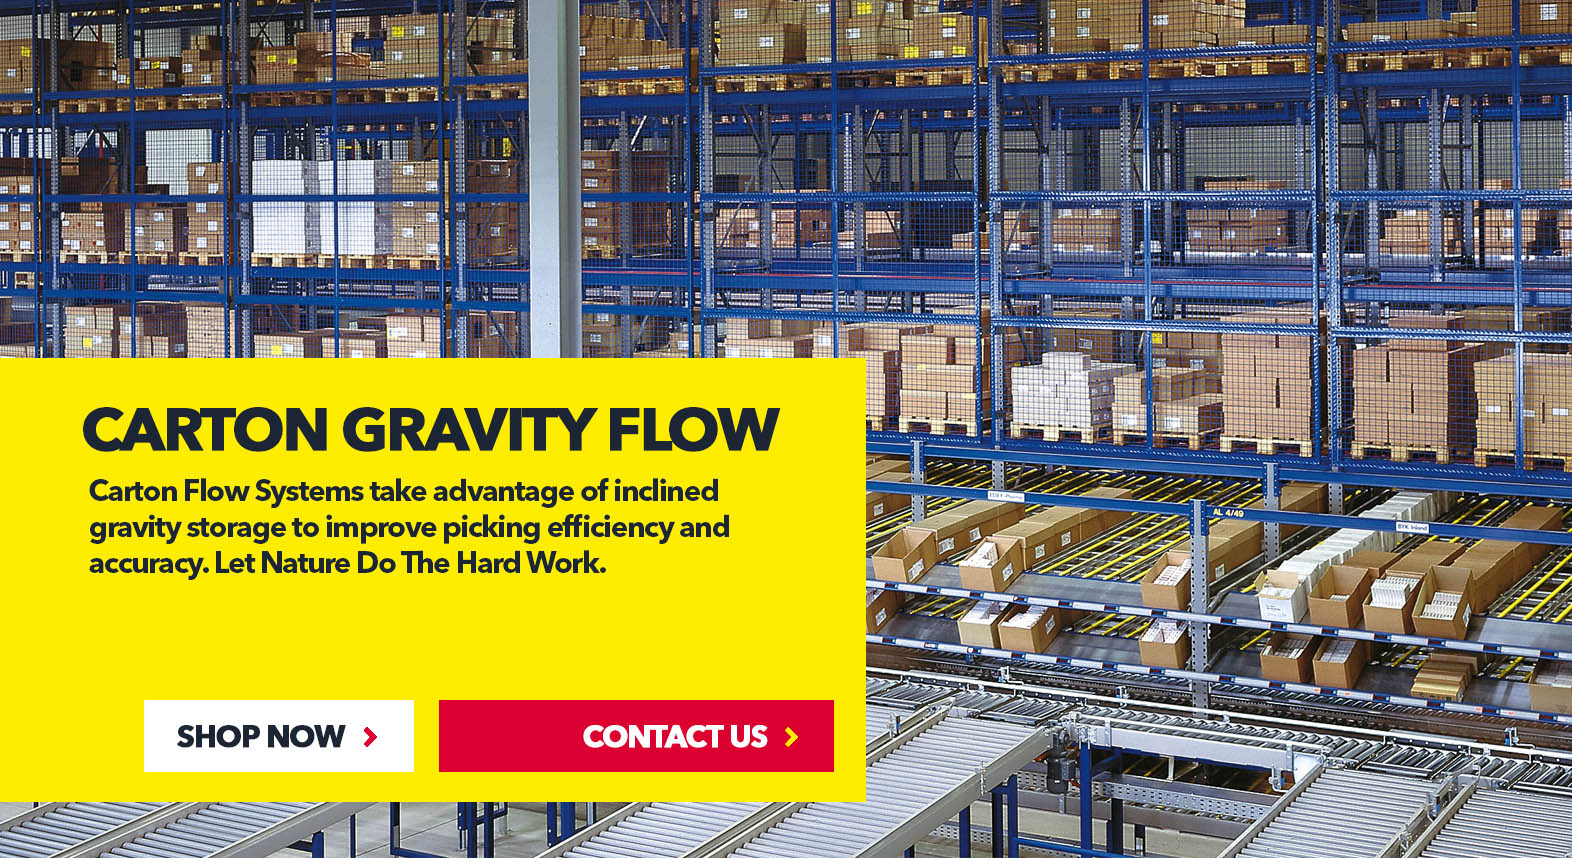 Carton Gravity Flow Systems by SSI Schaefer USA. Shop Now. Contact Us. www.chaefershelving.com